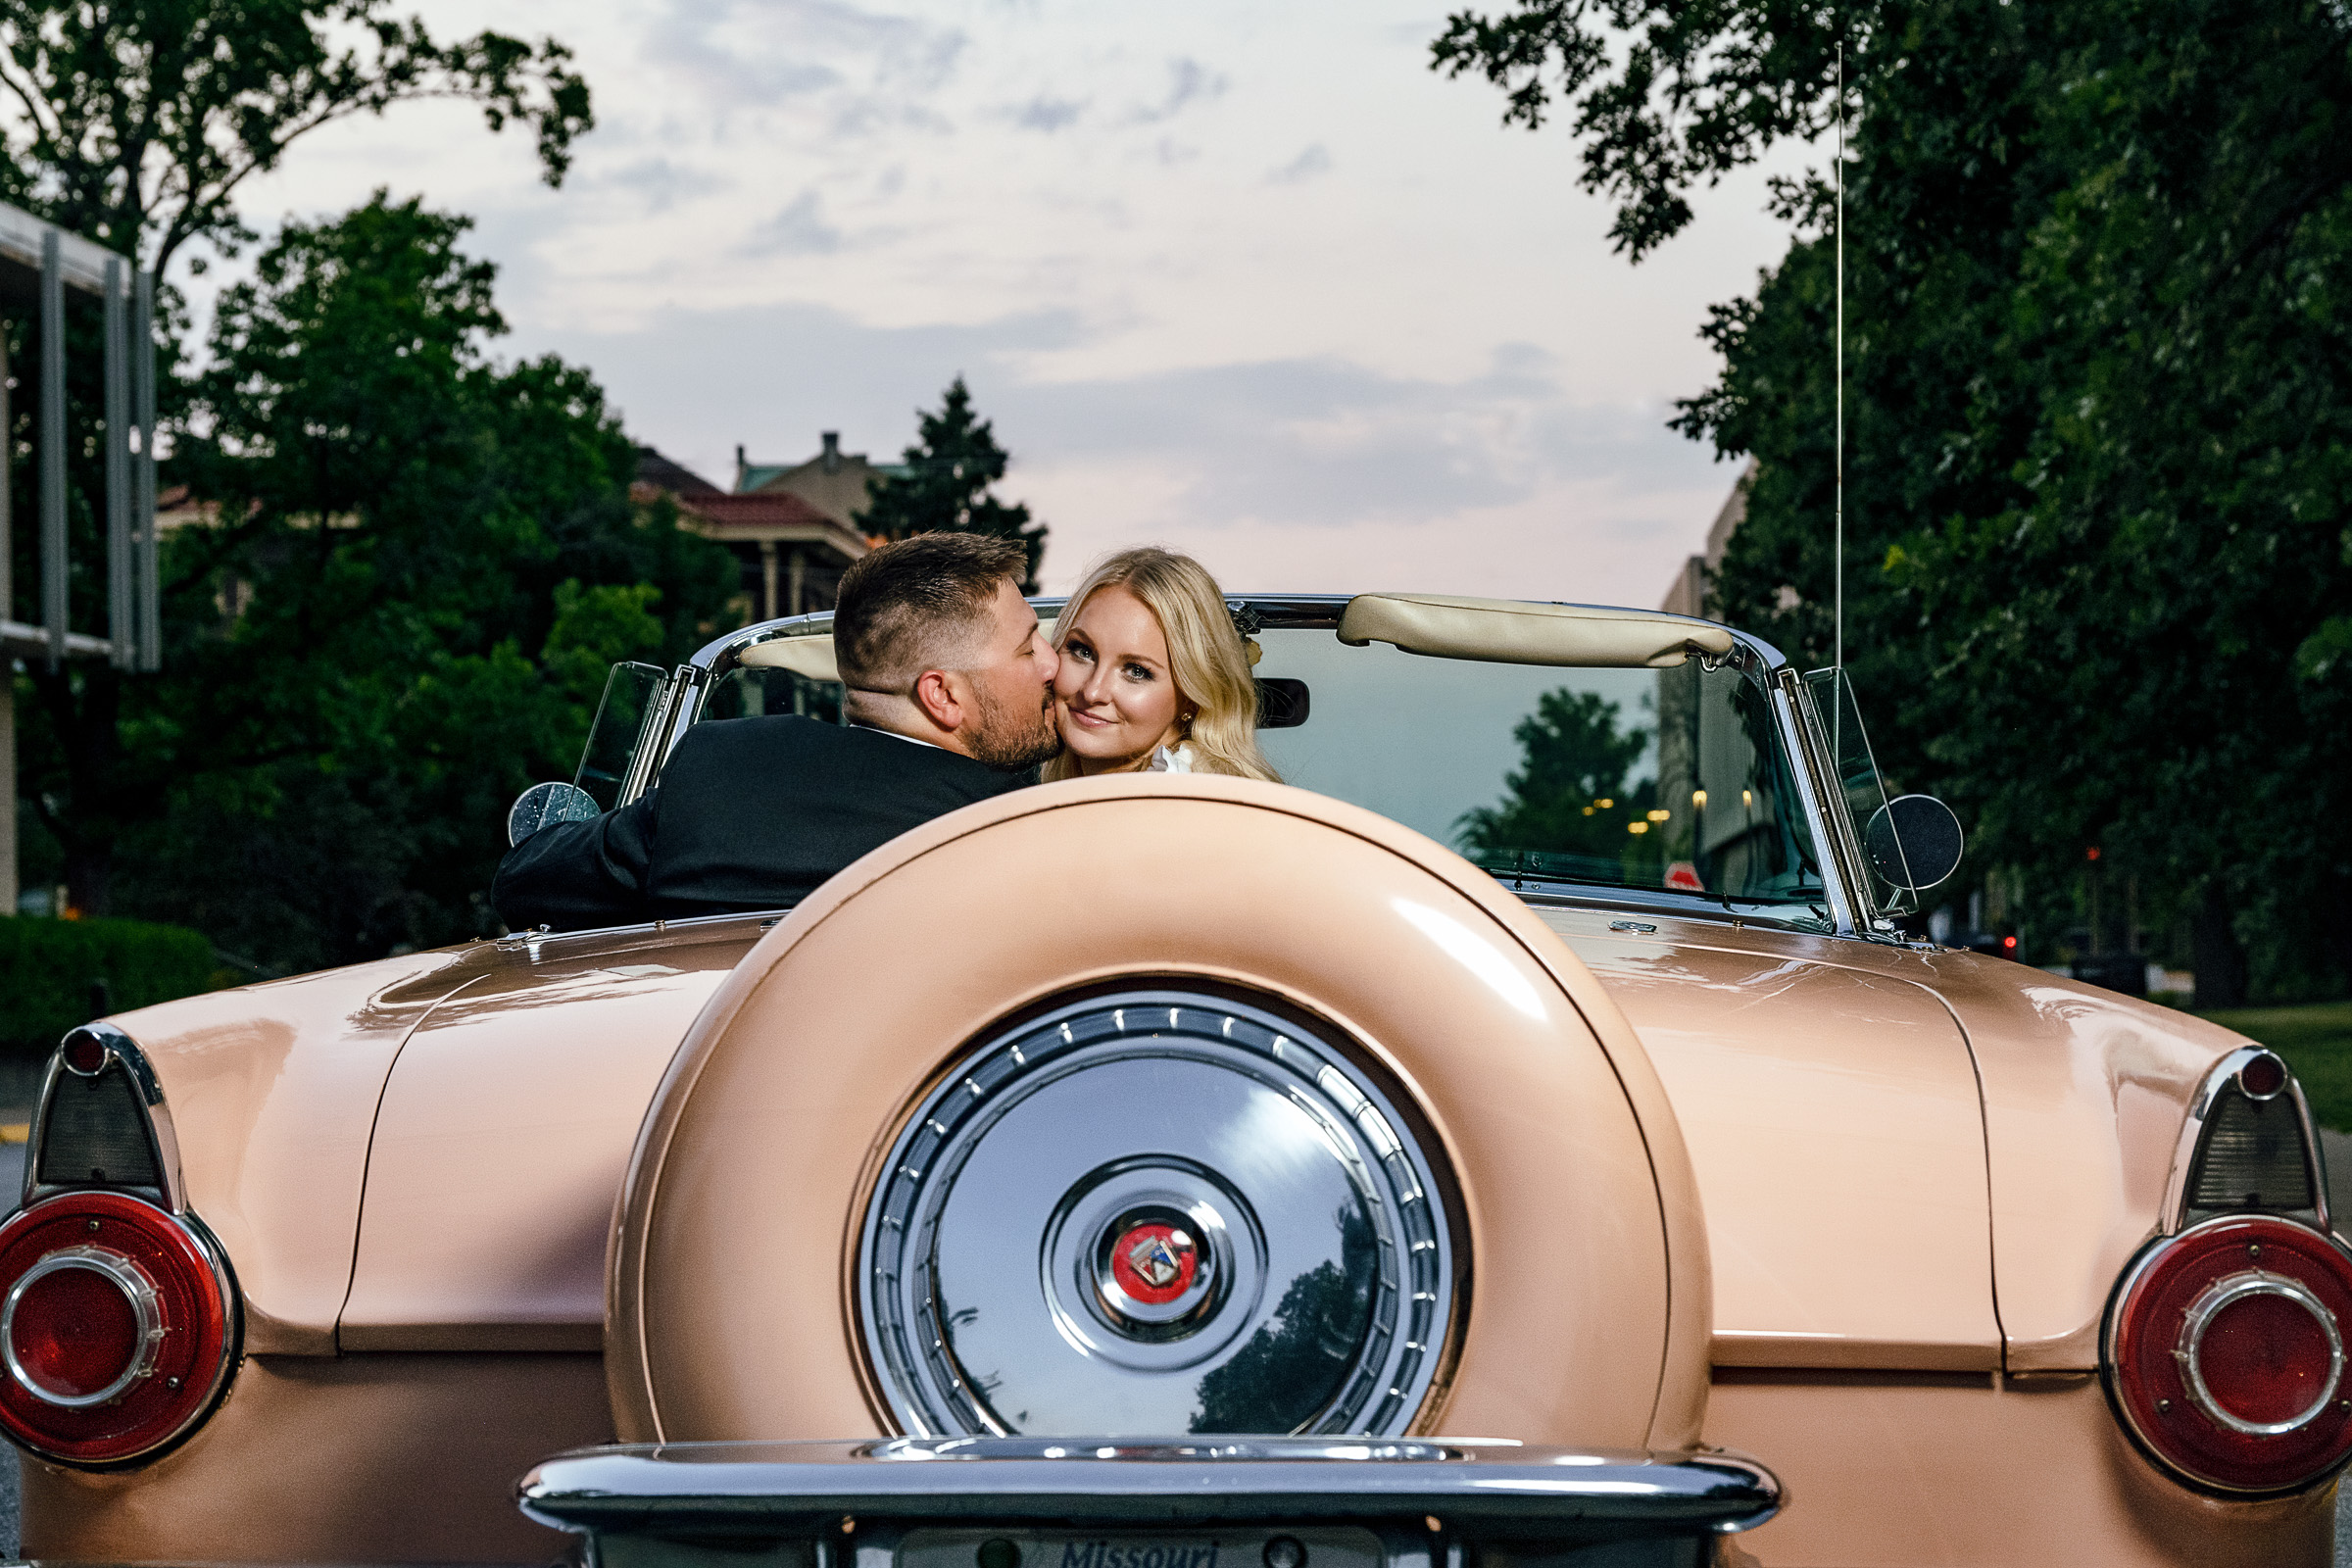 engaged couple sitting in 1956 buckskin colored thunderbird convertible while guy kisses woman on cheek